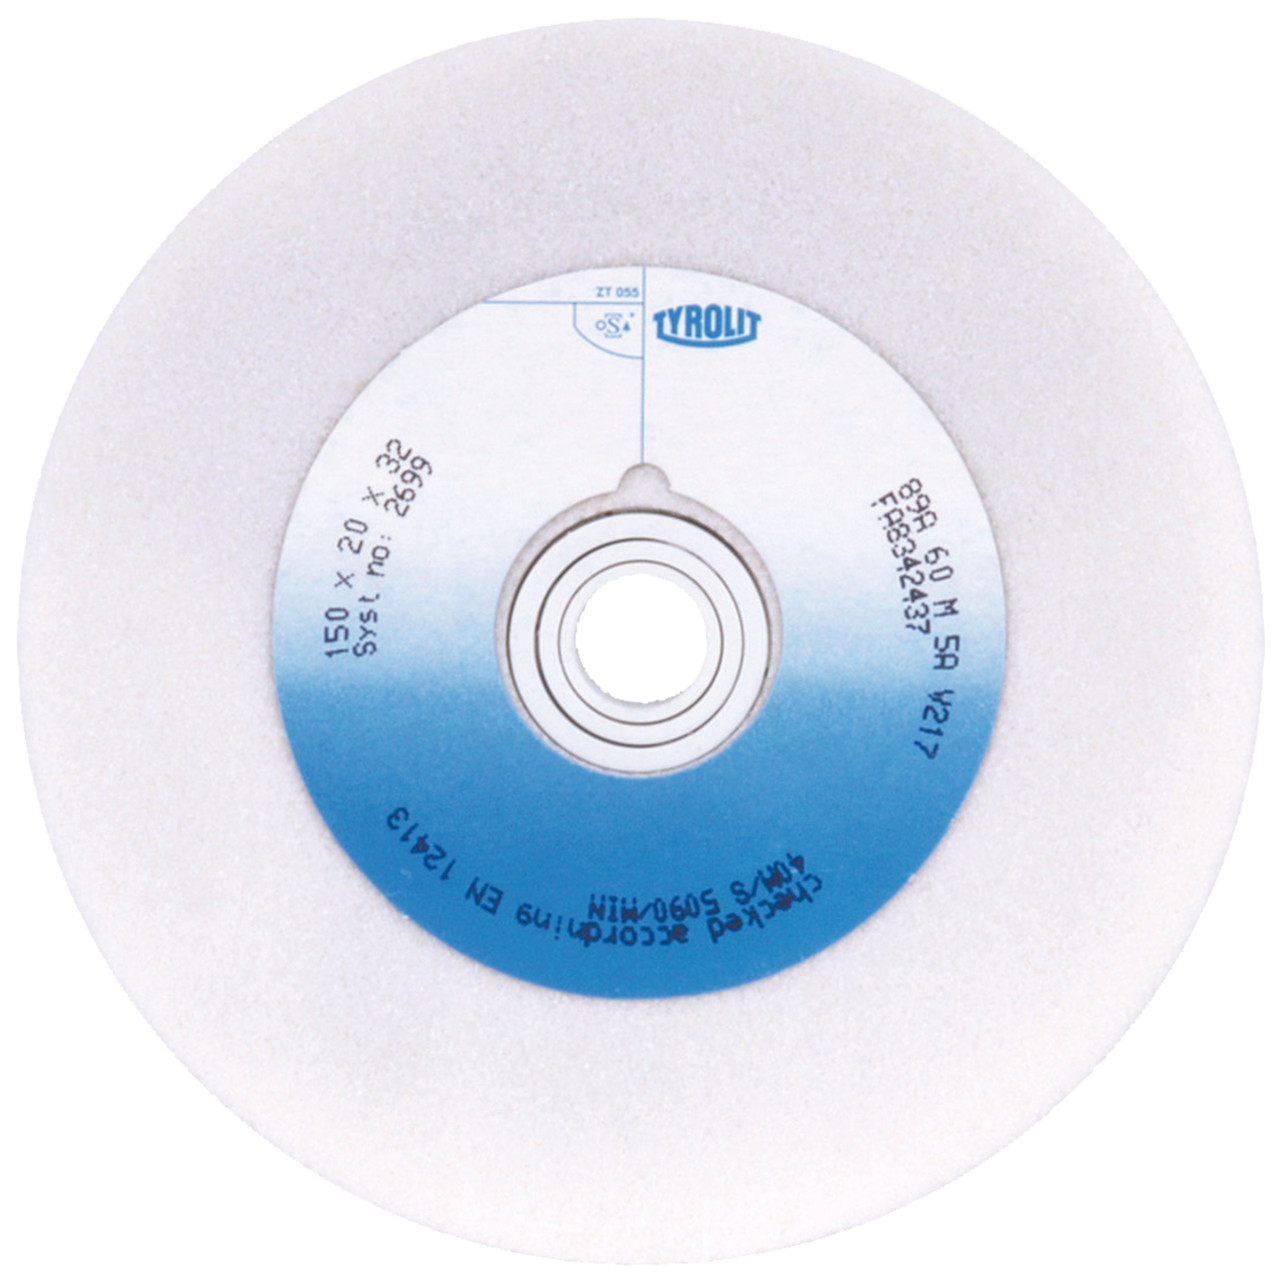 TYROLIT conventional ceramic grinding wheels DxDxH 200x32x51 For high-alloy steels and HSS, shape: 1, Art. 78379